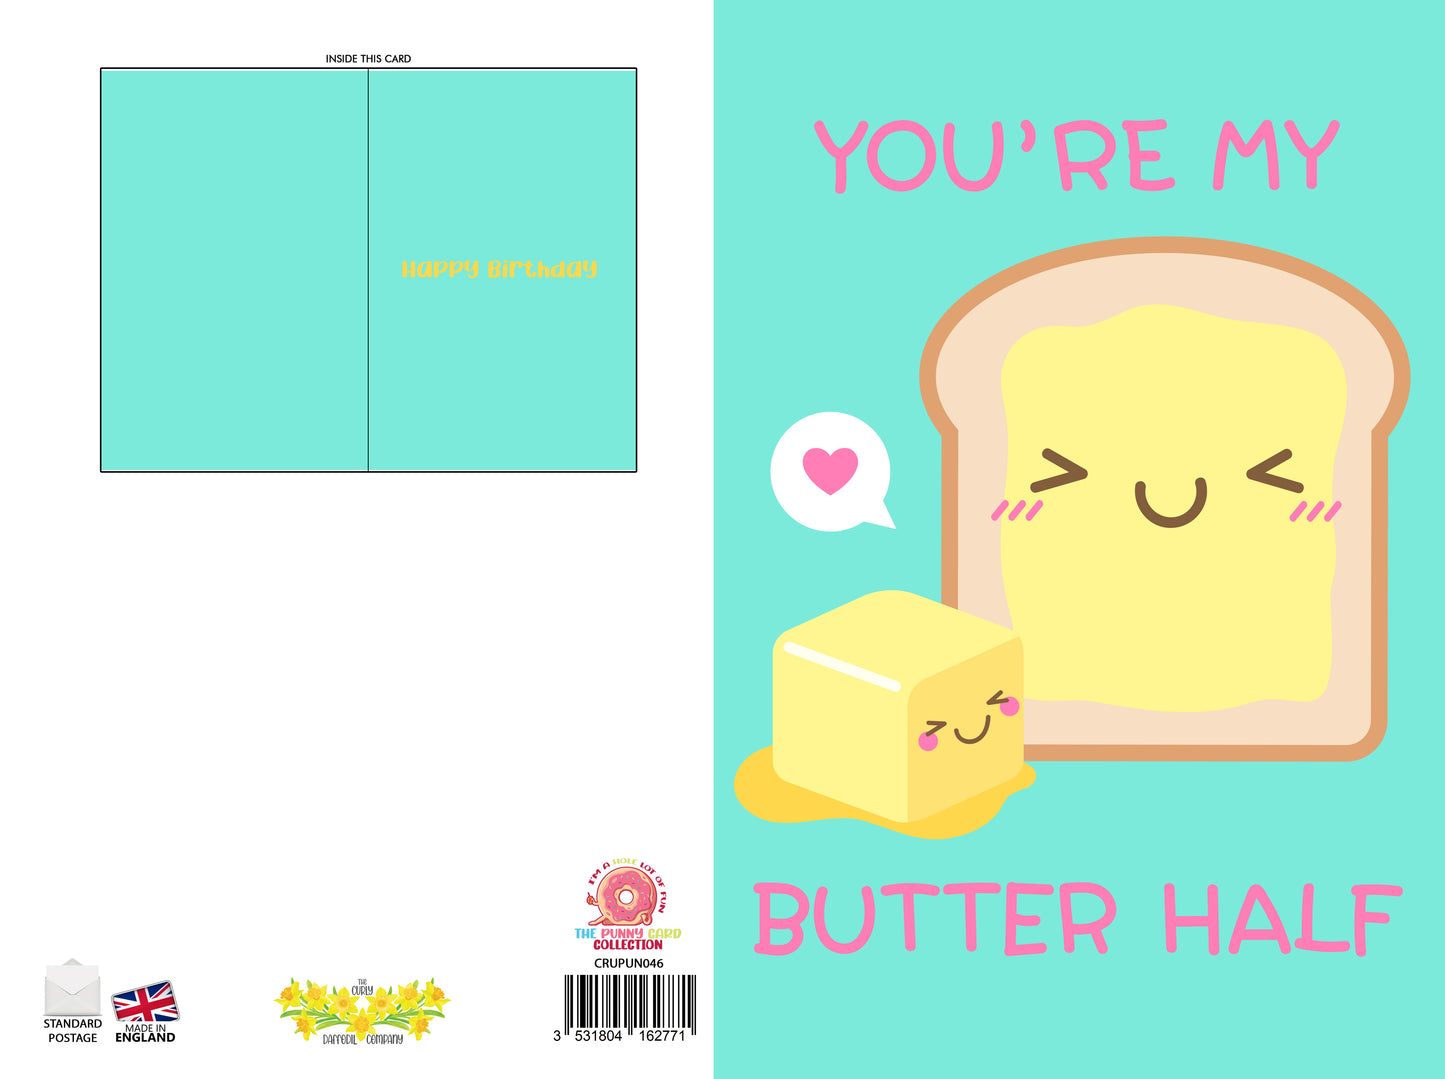 You're My Butter Half